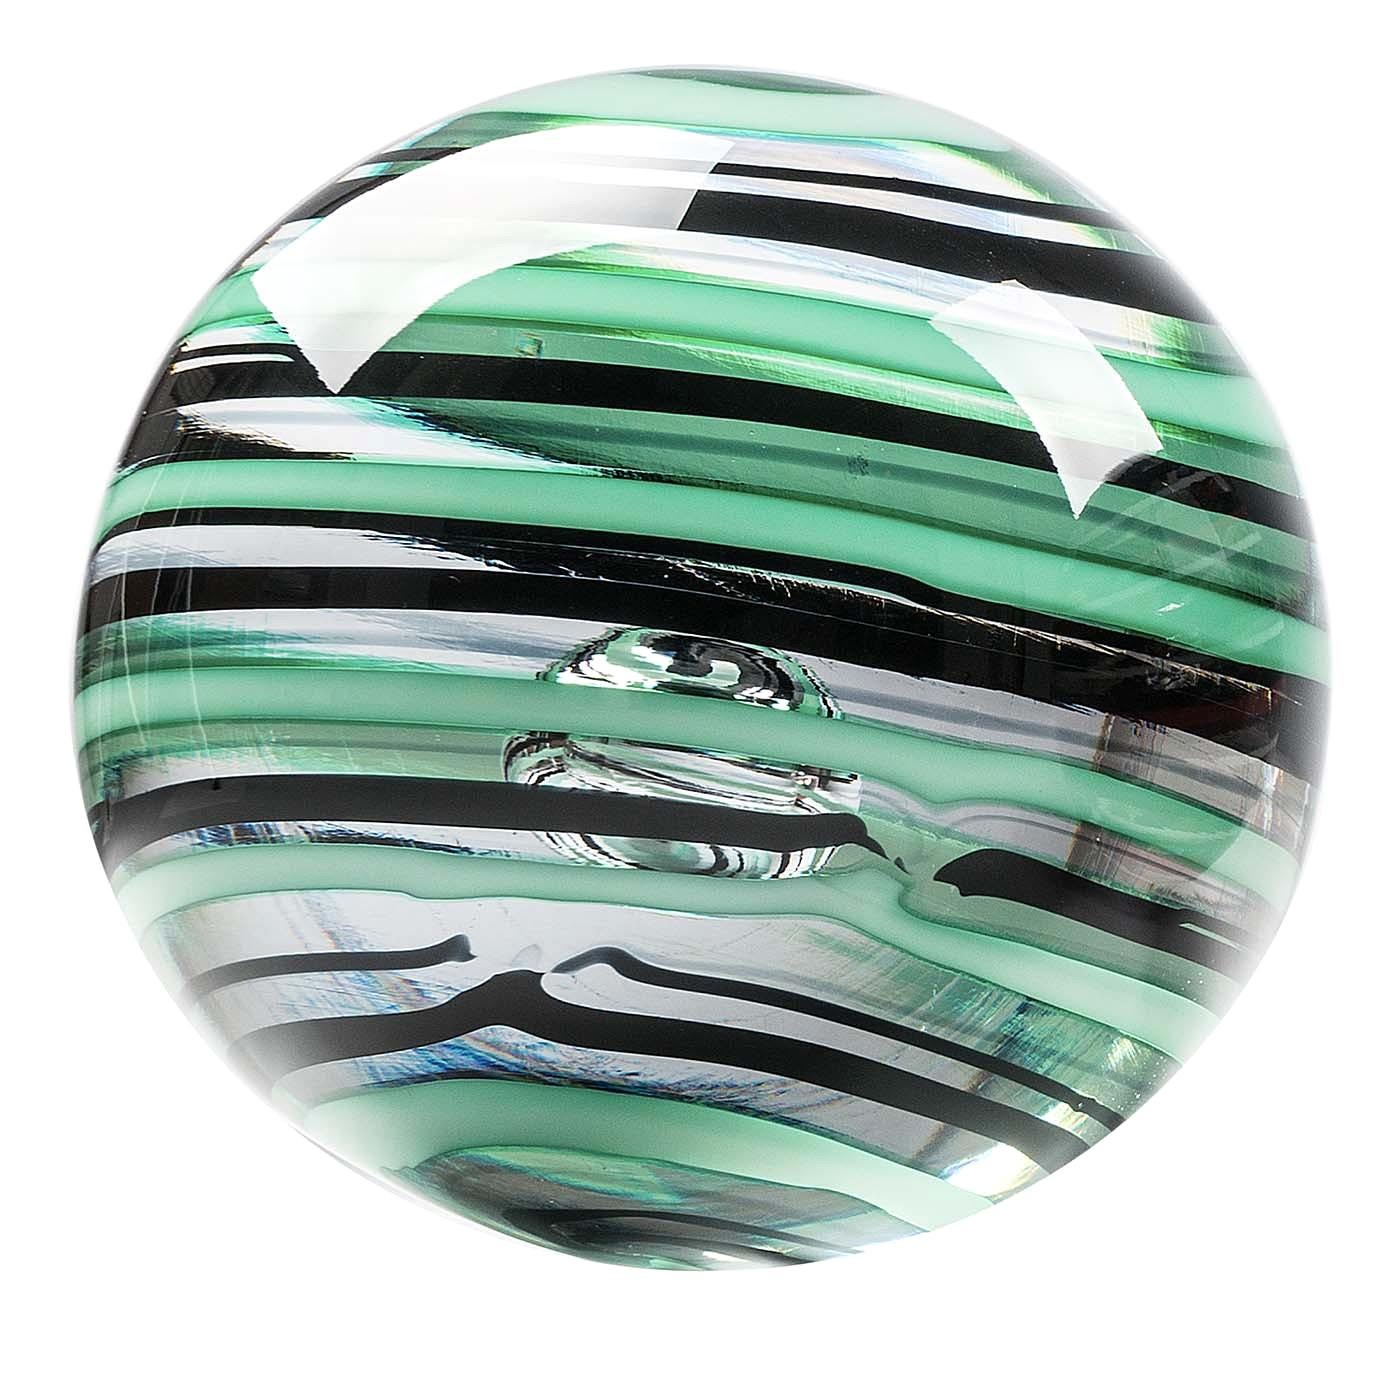 Earth Glass Sphere by Vittore Frattini